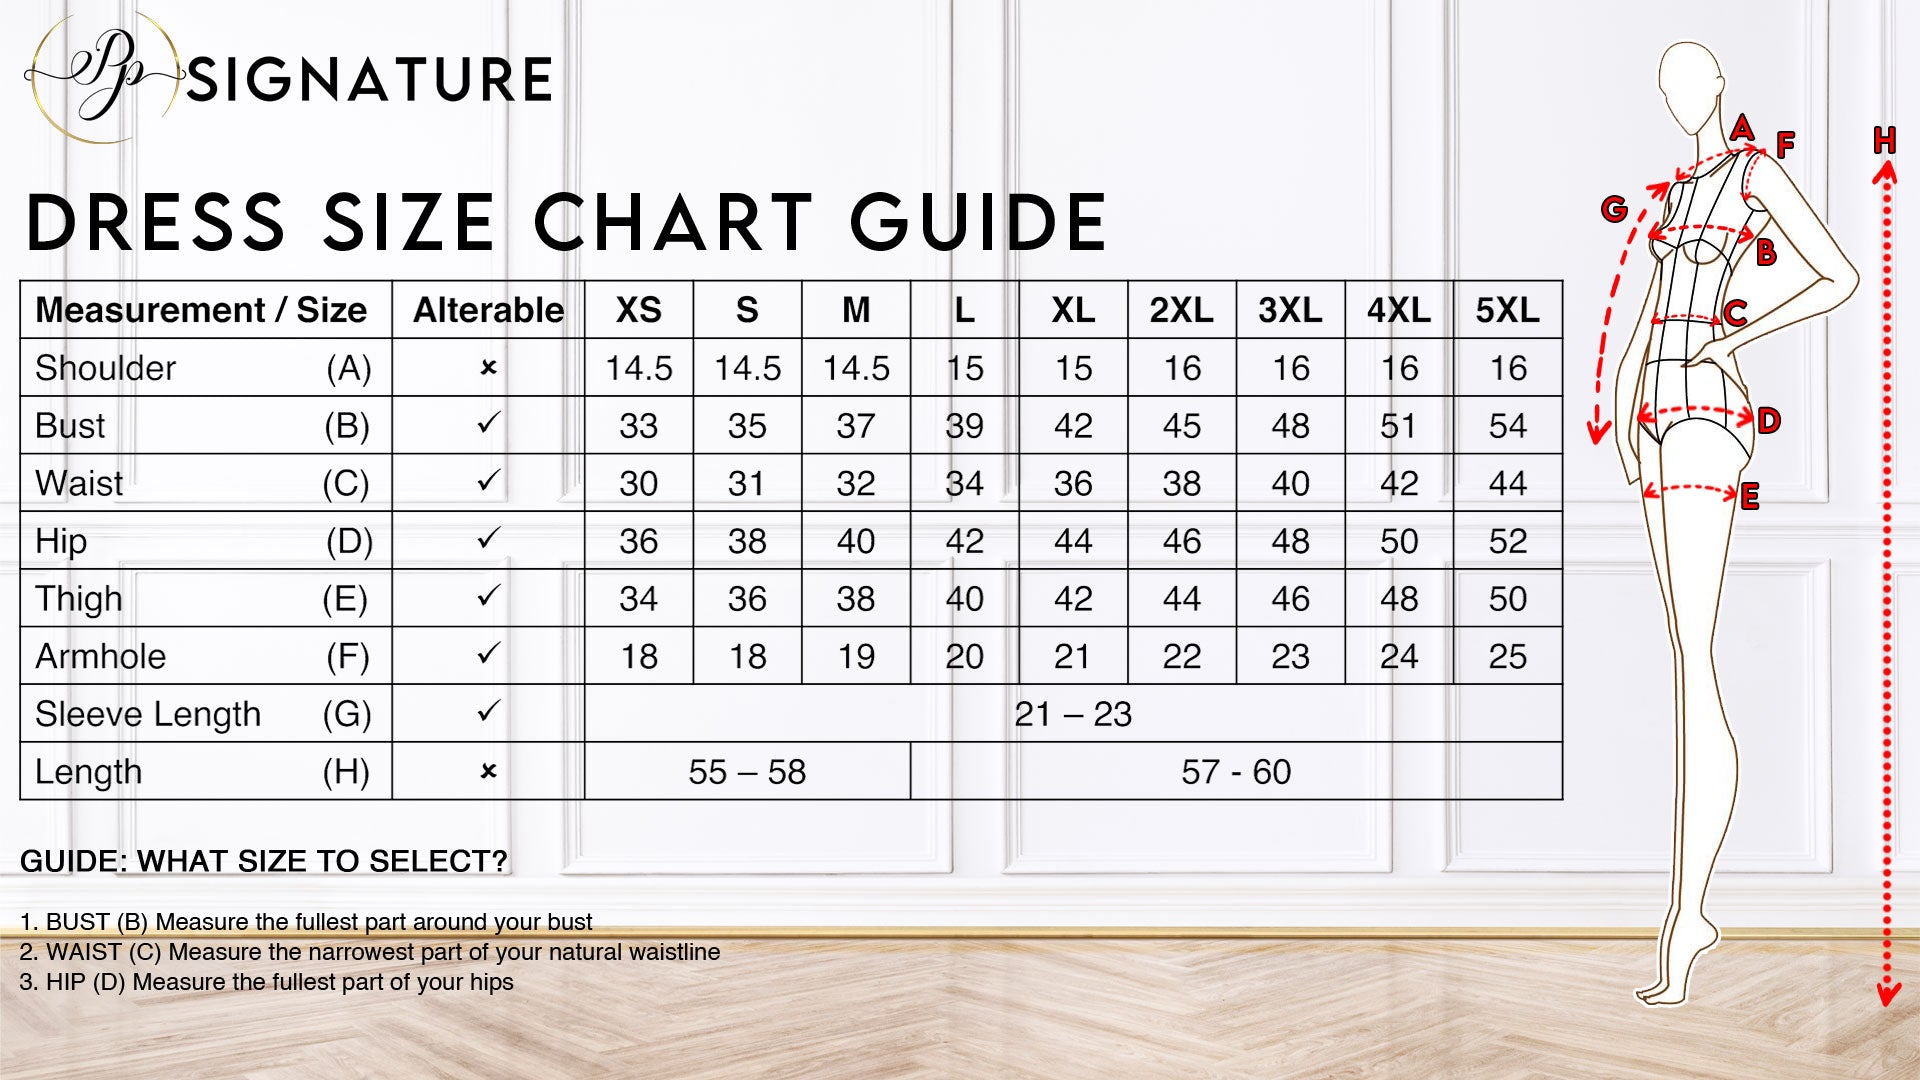 pp signature sizing guide-measurement-size guide